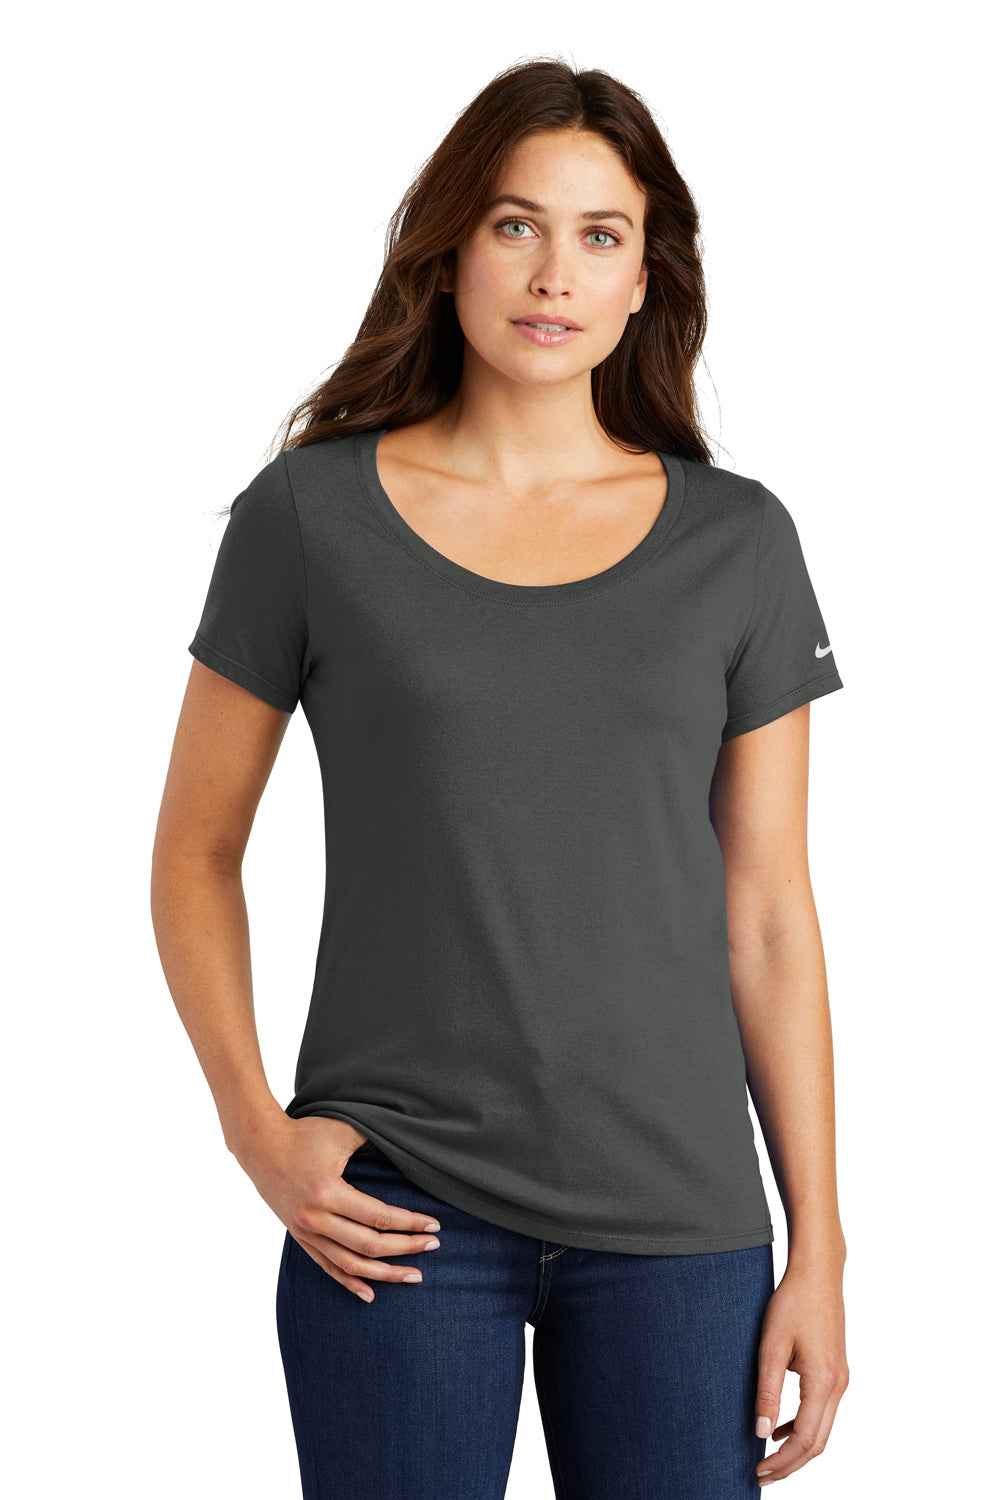 Nike NKBQ5236 Womens Core Short Sleeve Scoop Neck T-Shirt Anthracite Grey Front